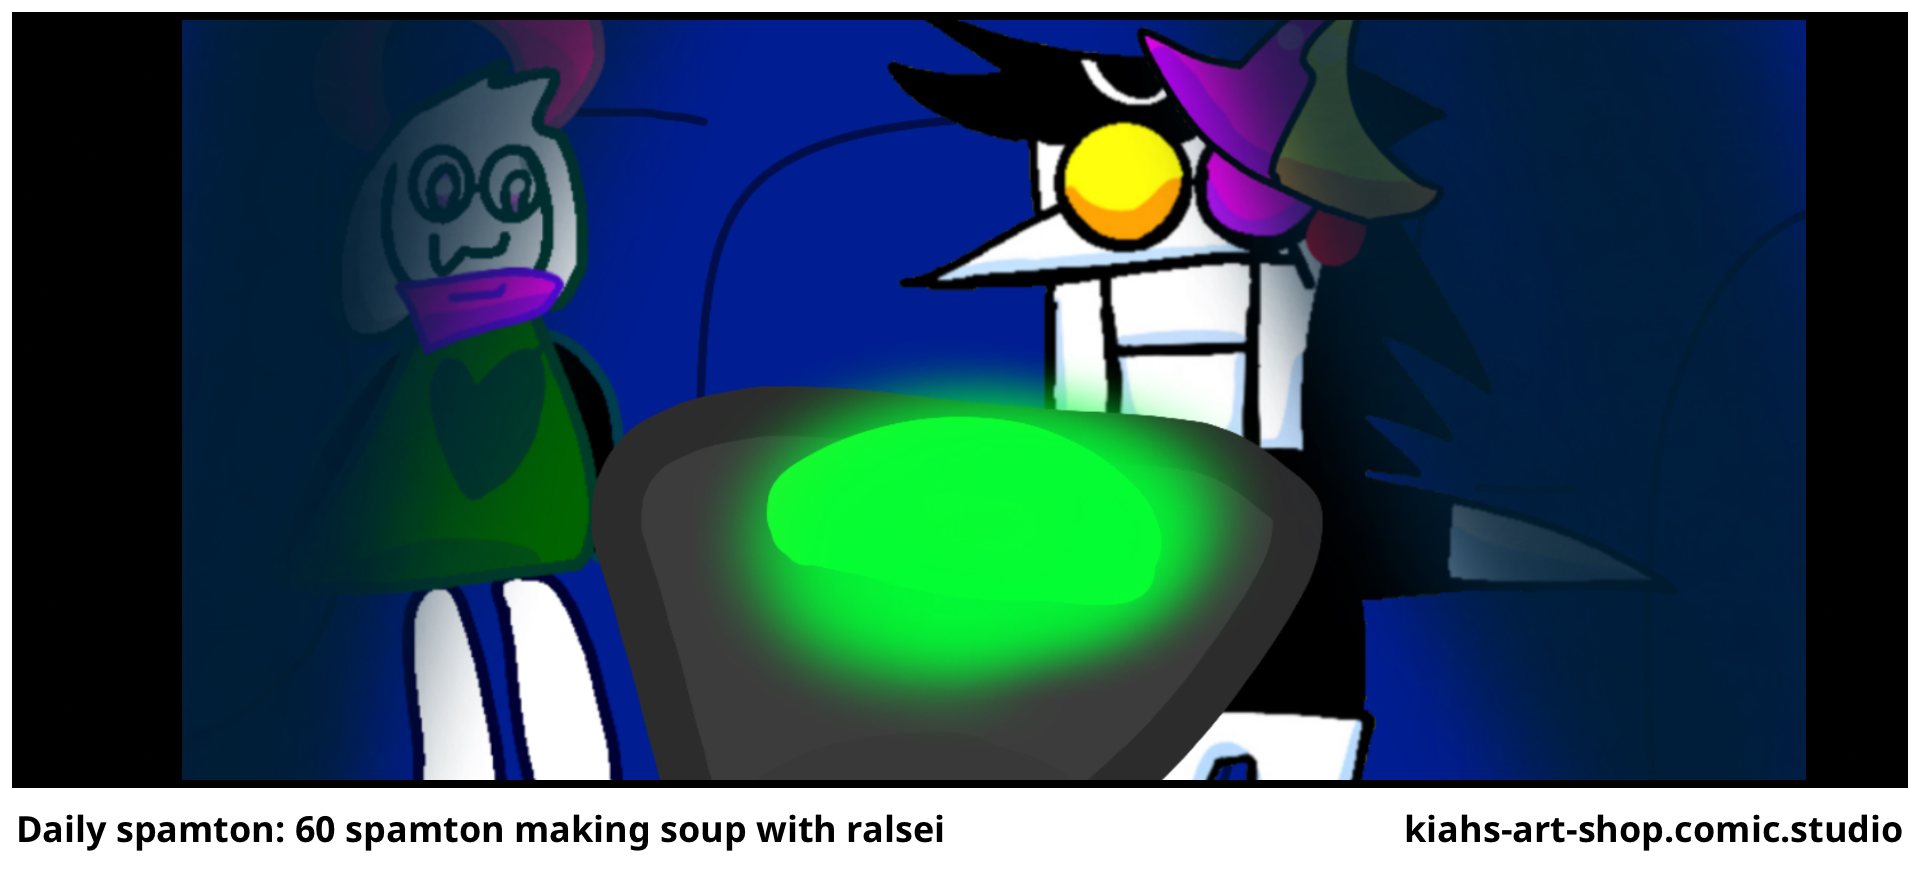 Daily spamton: 60 spamton making soup with ralsei